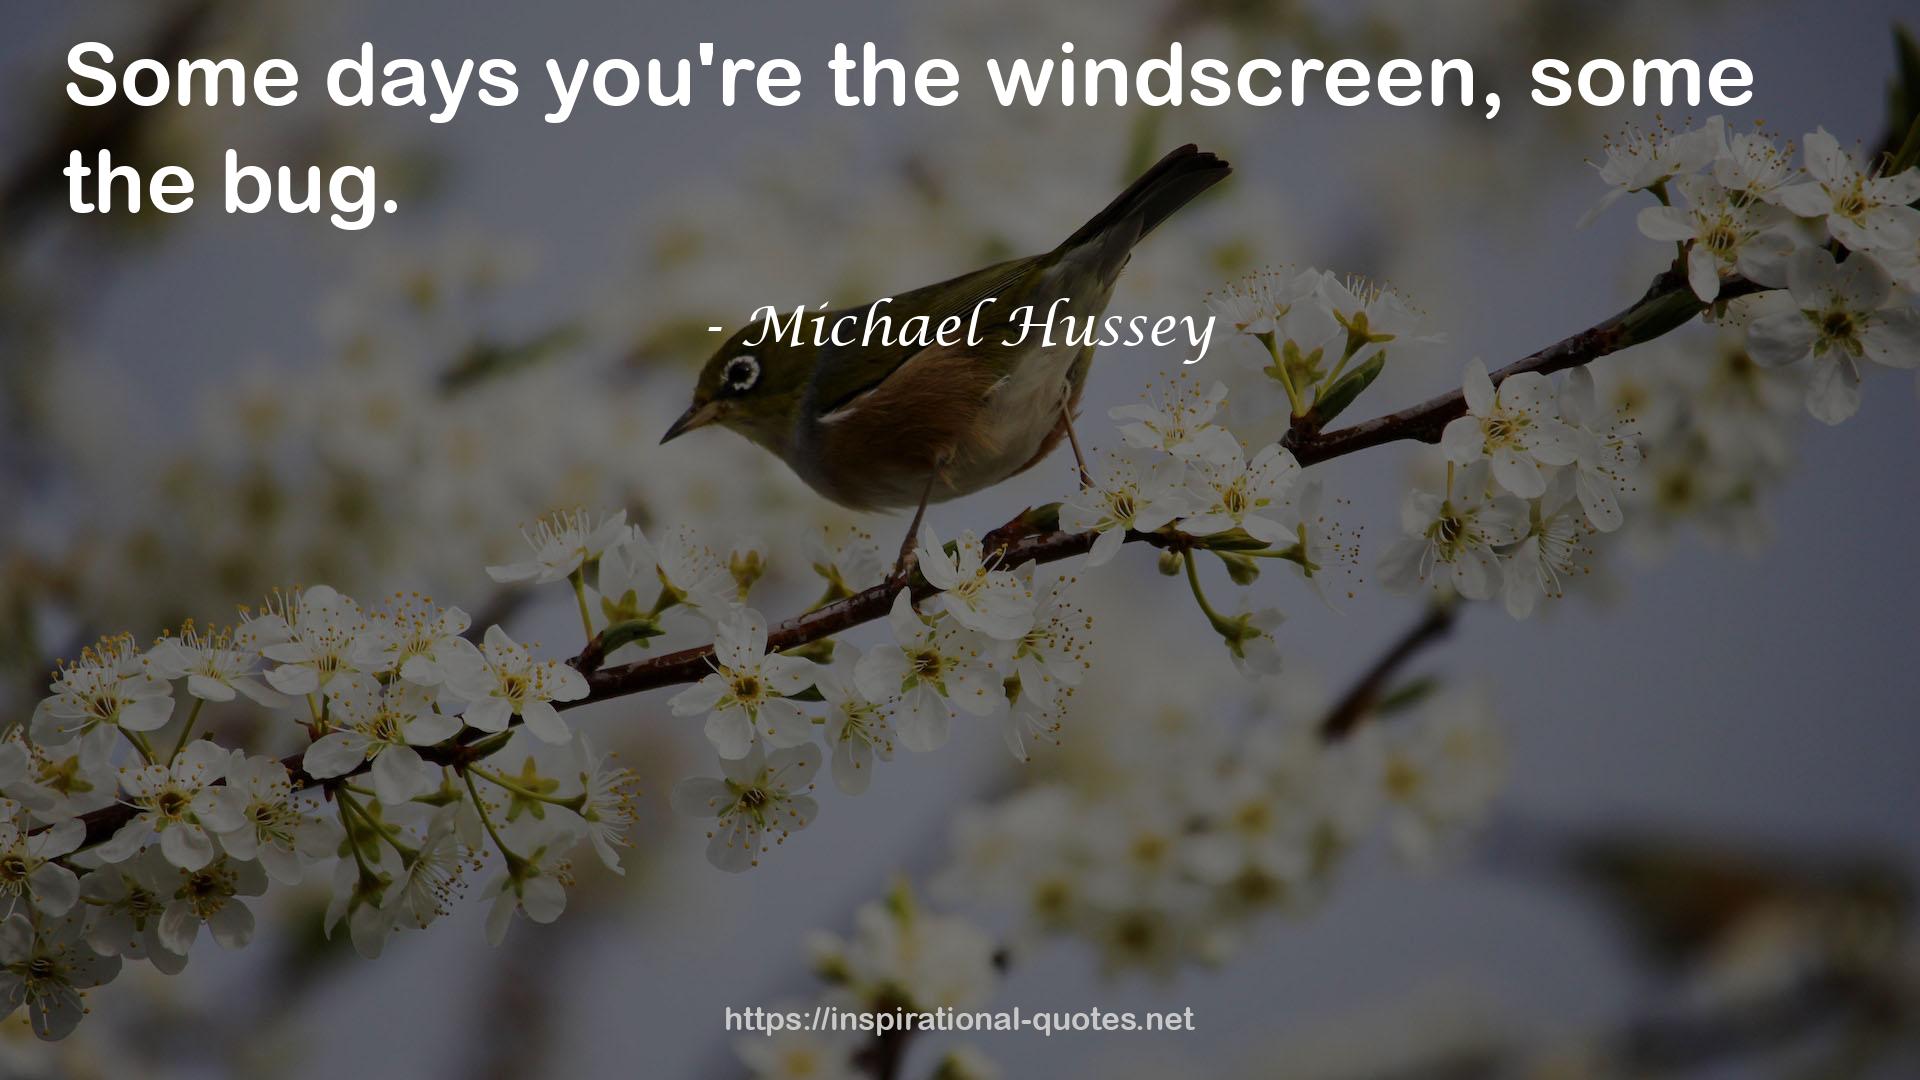 Michael Hussey QUOTES